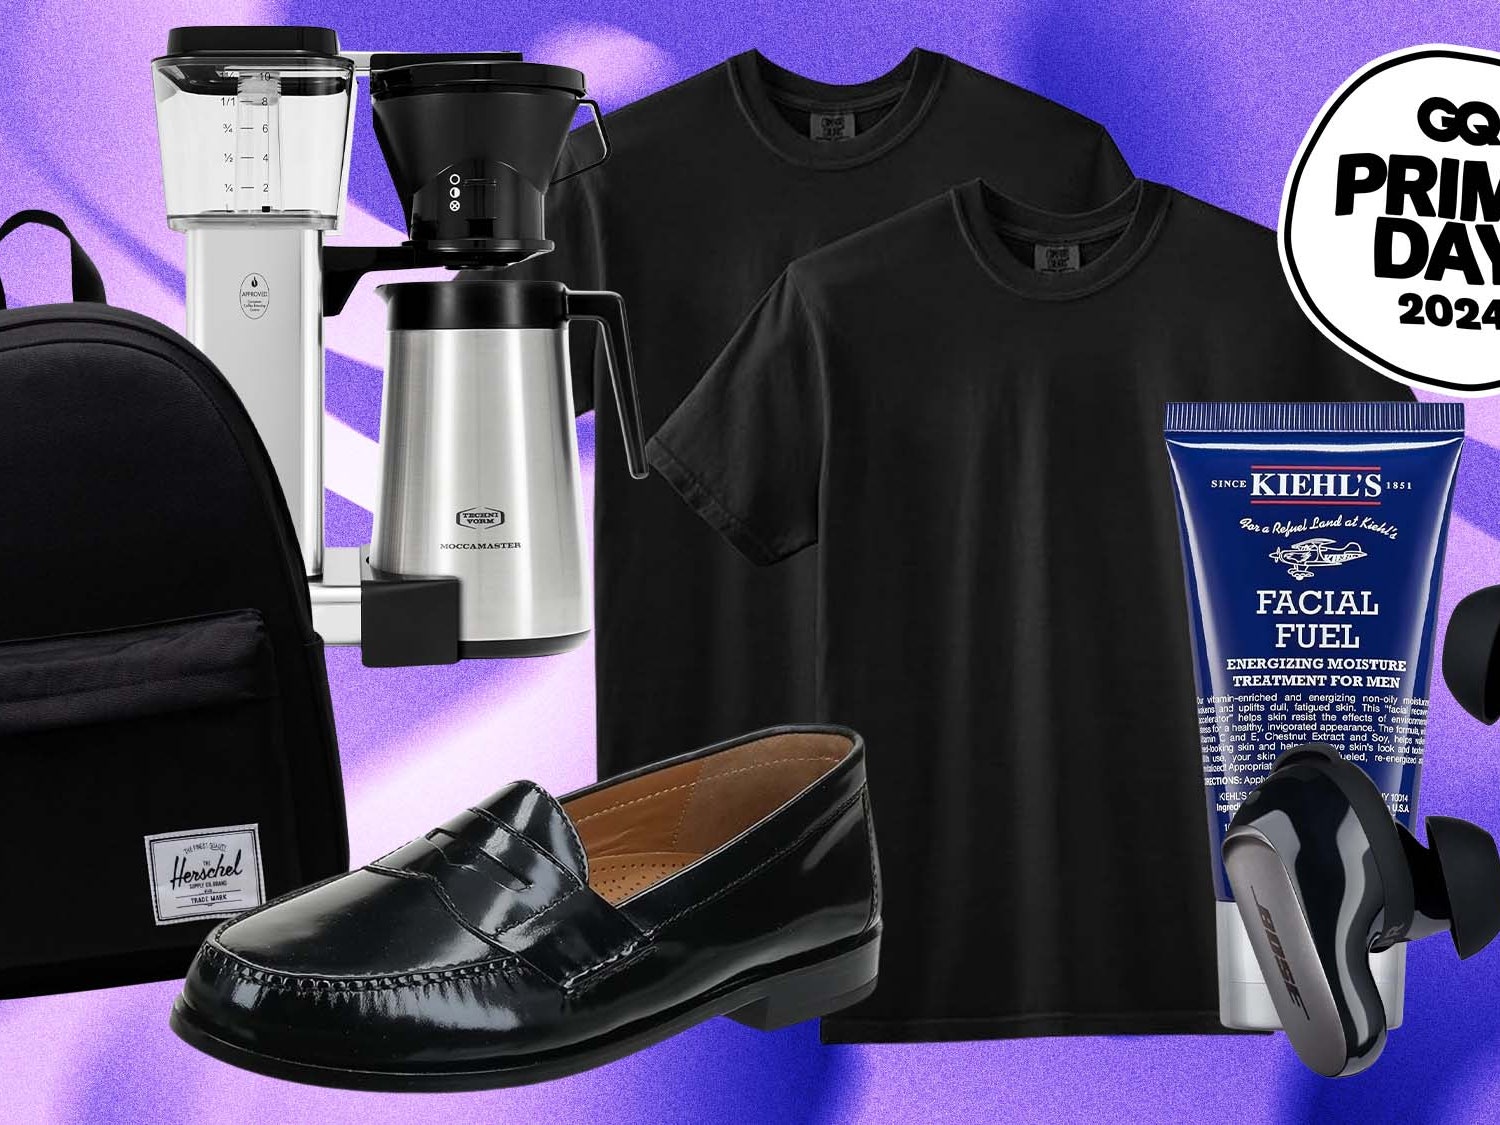 What Are GQ Staffers Actually Buying This Prime Day?